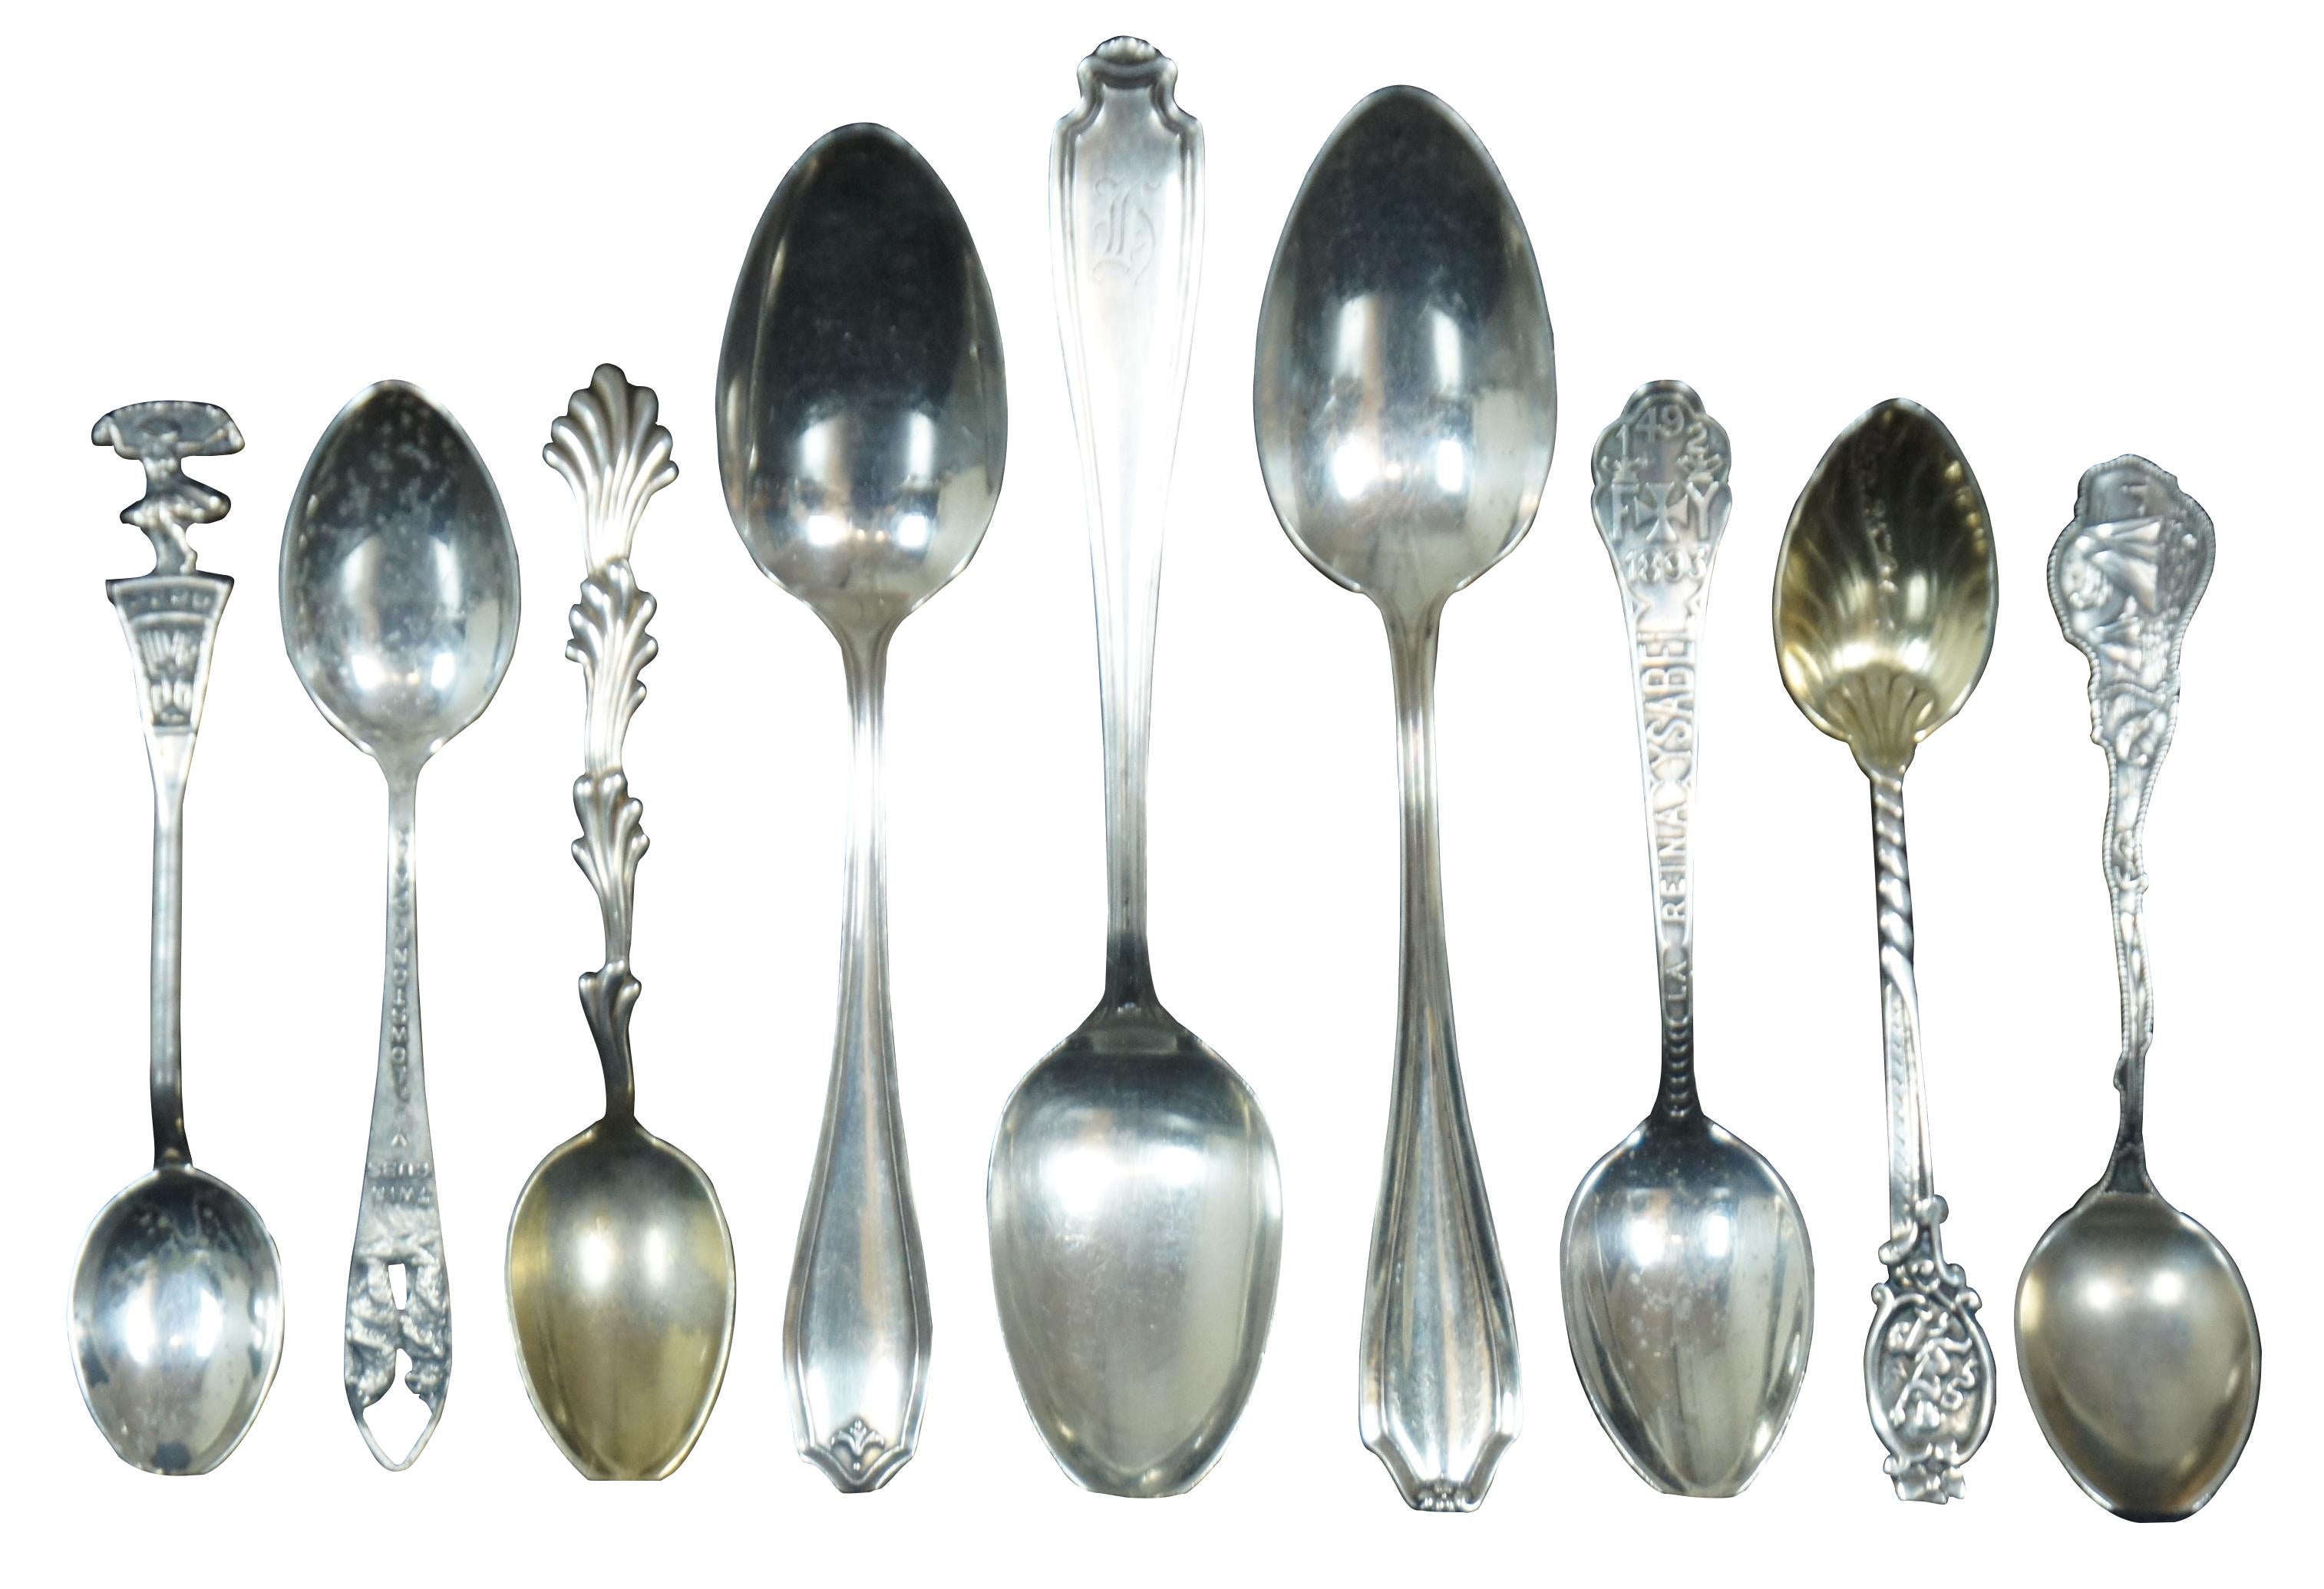 18 Antique Sterling Silver Souvenir Tea Serving Demitasse Spoons Spreader 347g In Good Condition For Sale In Dayton, OH